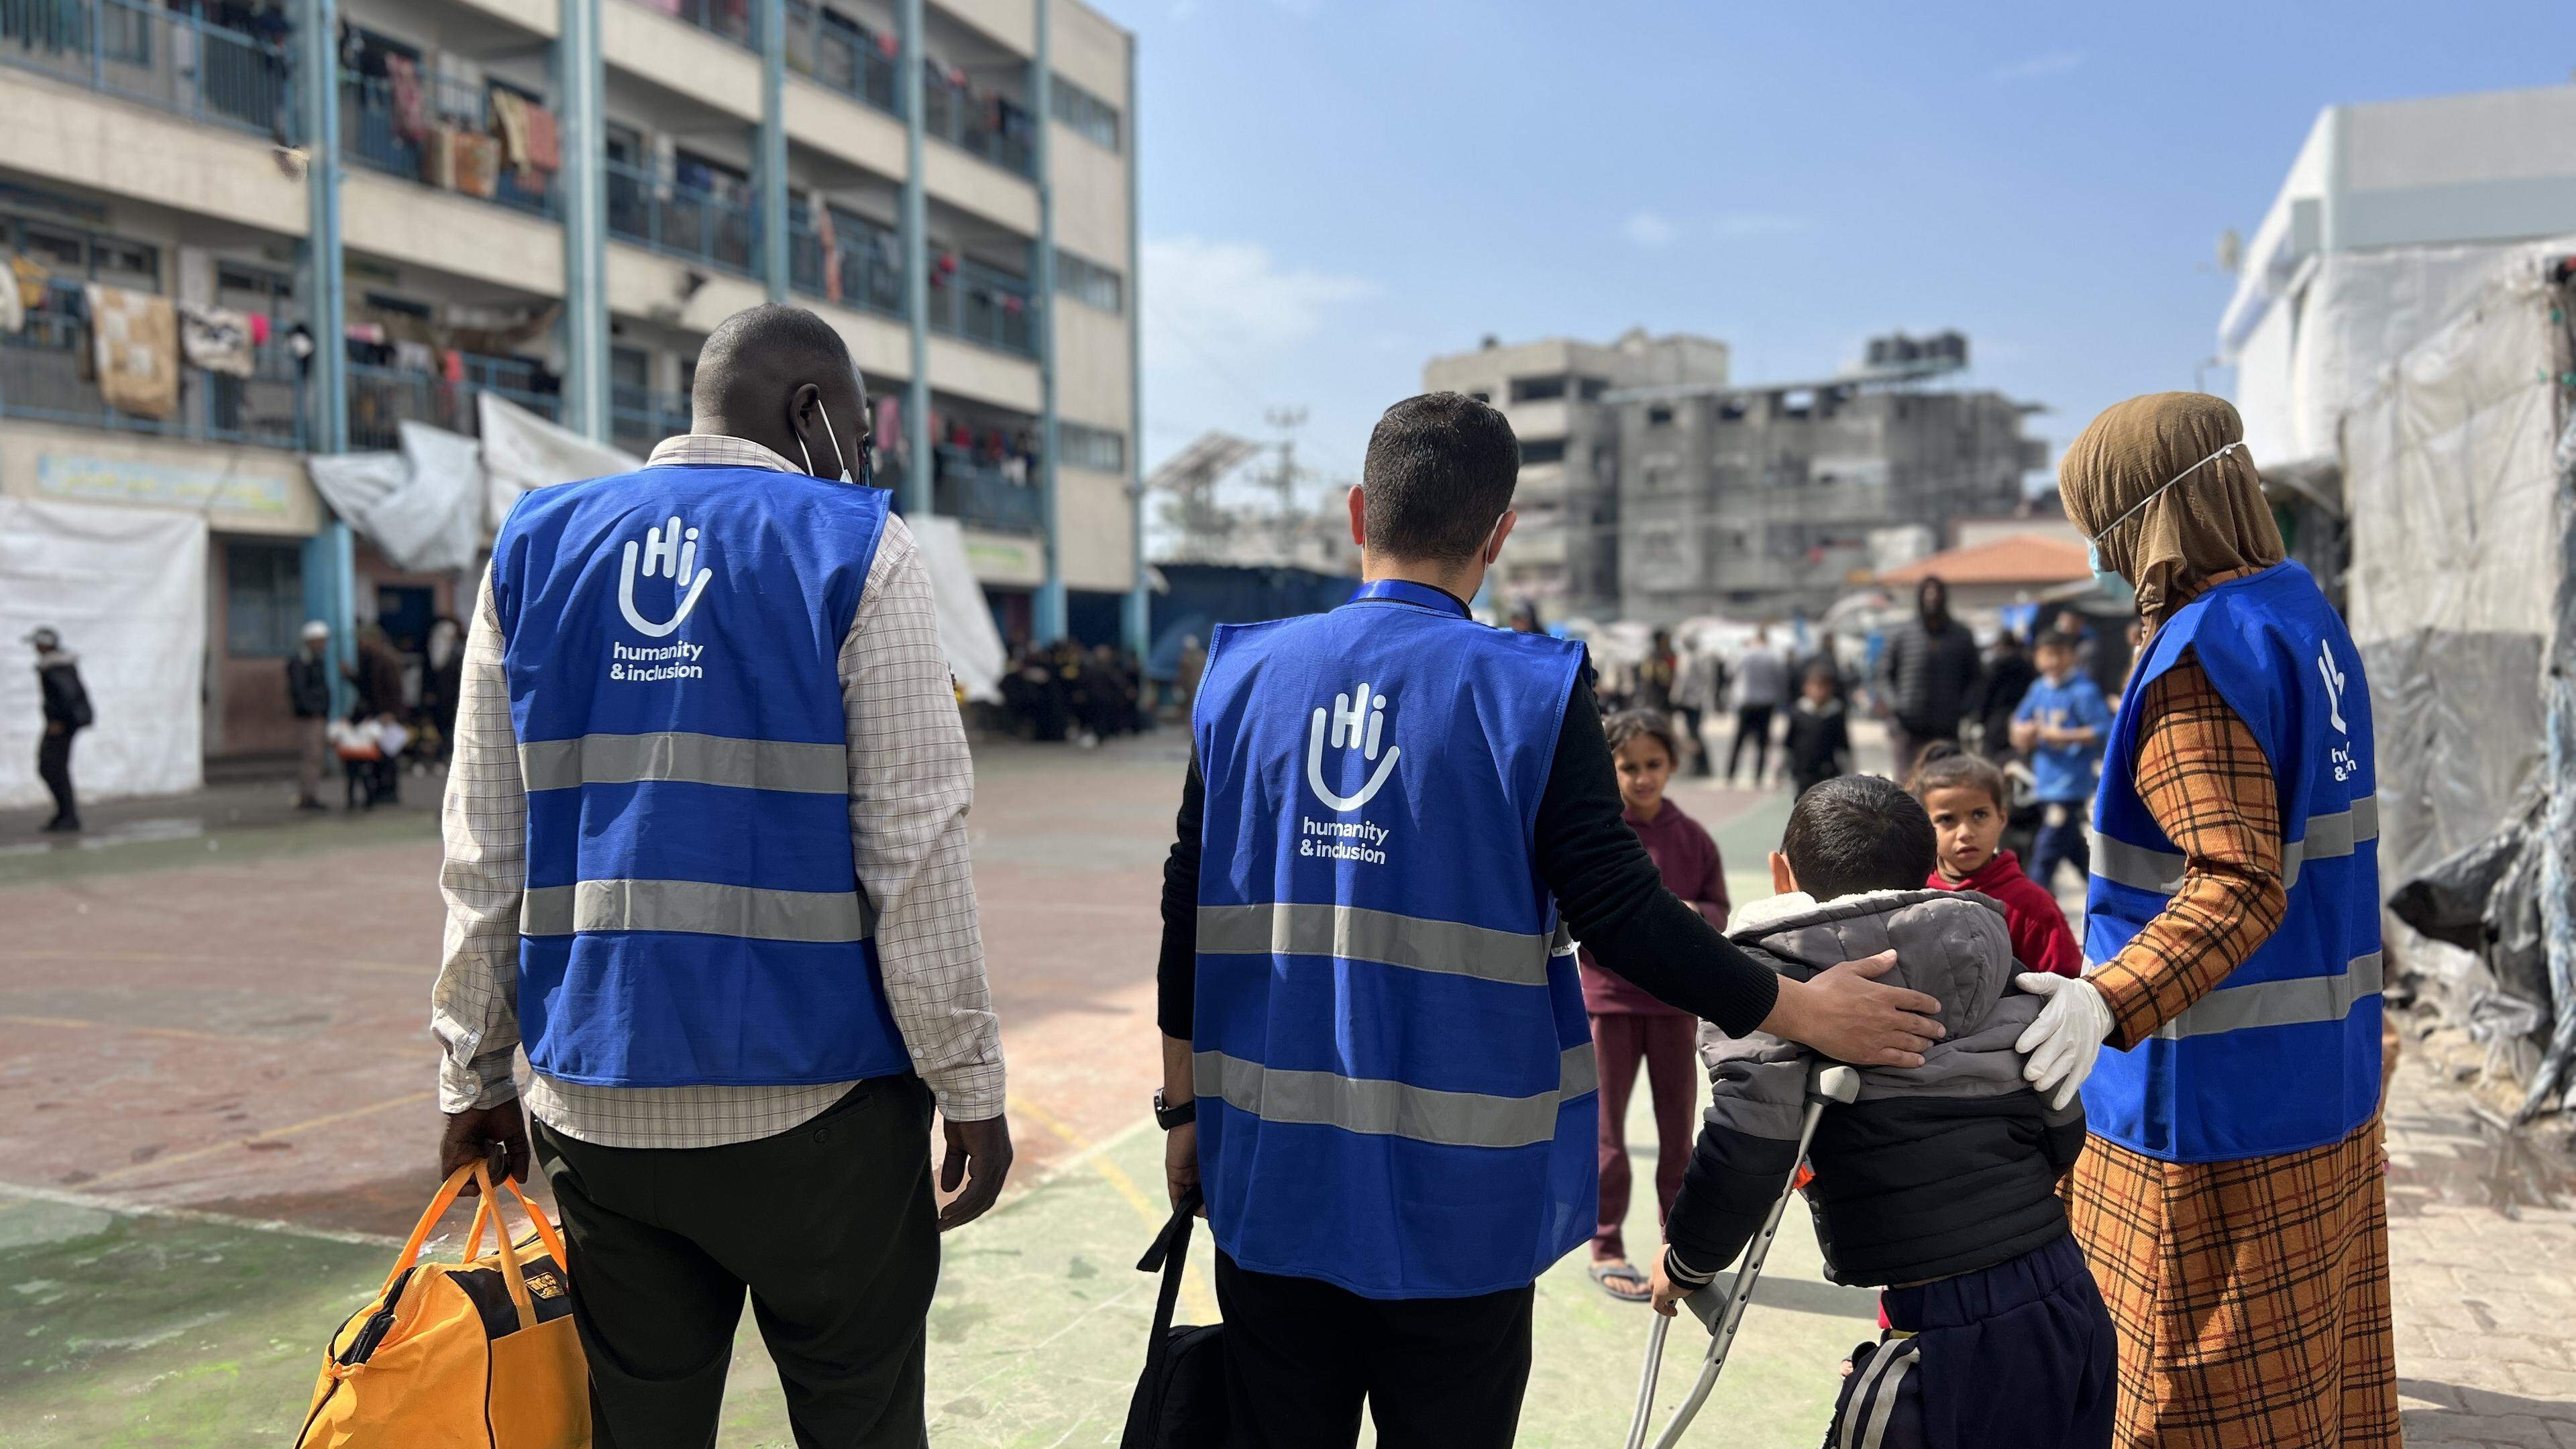 Handicap International staff working on the ground in Gaza are supplying crutches and wheelchairs, and providing hygiene kits and basic aid